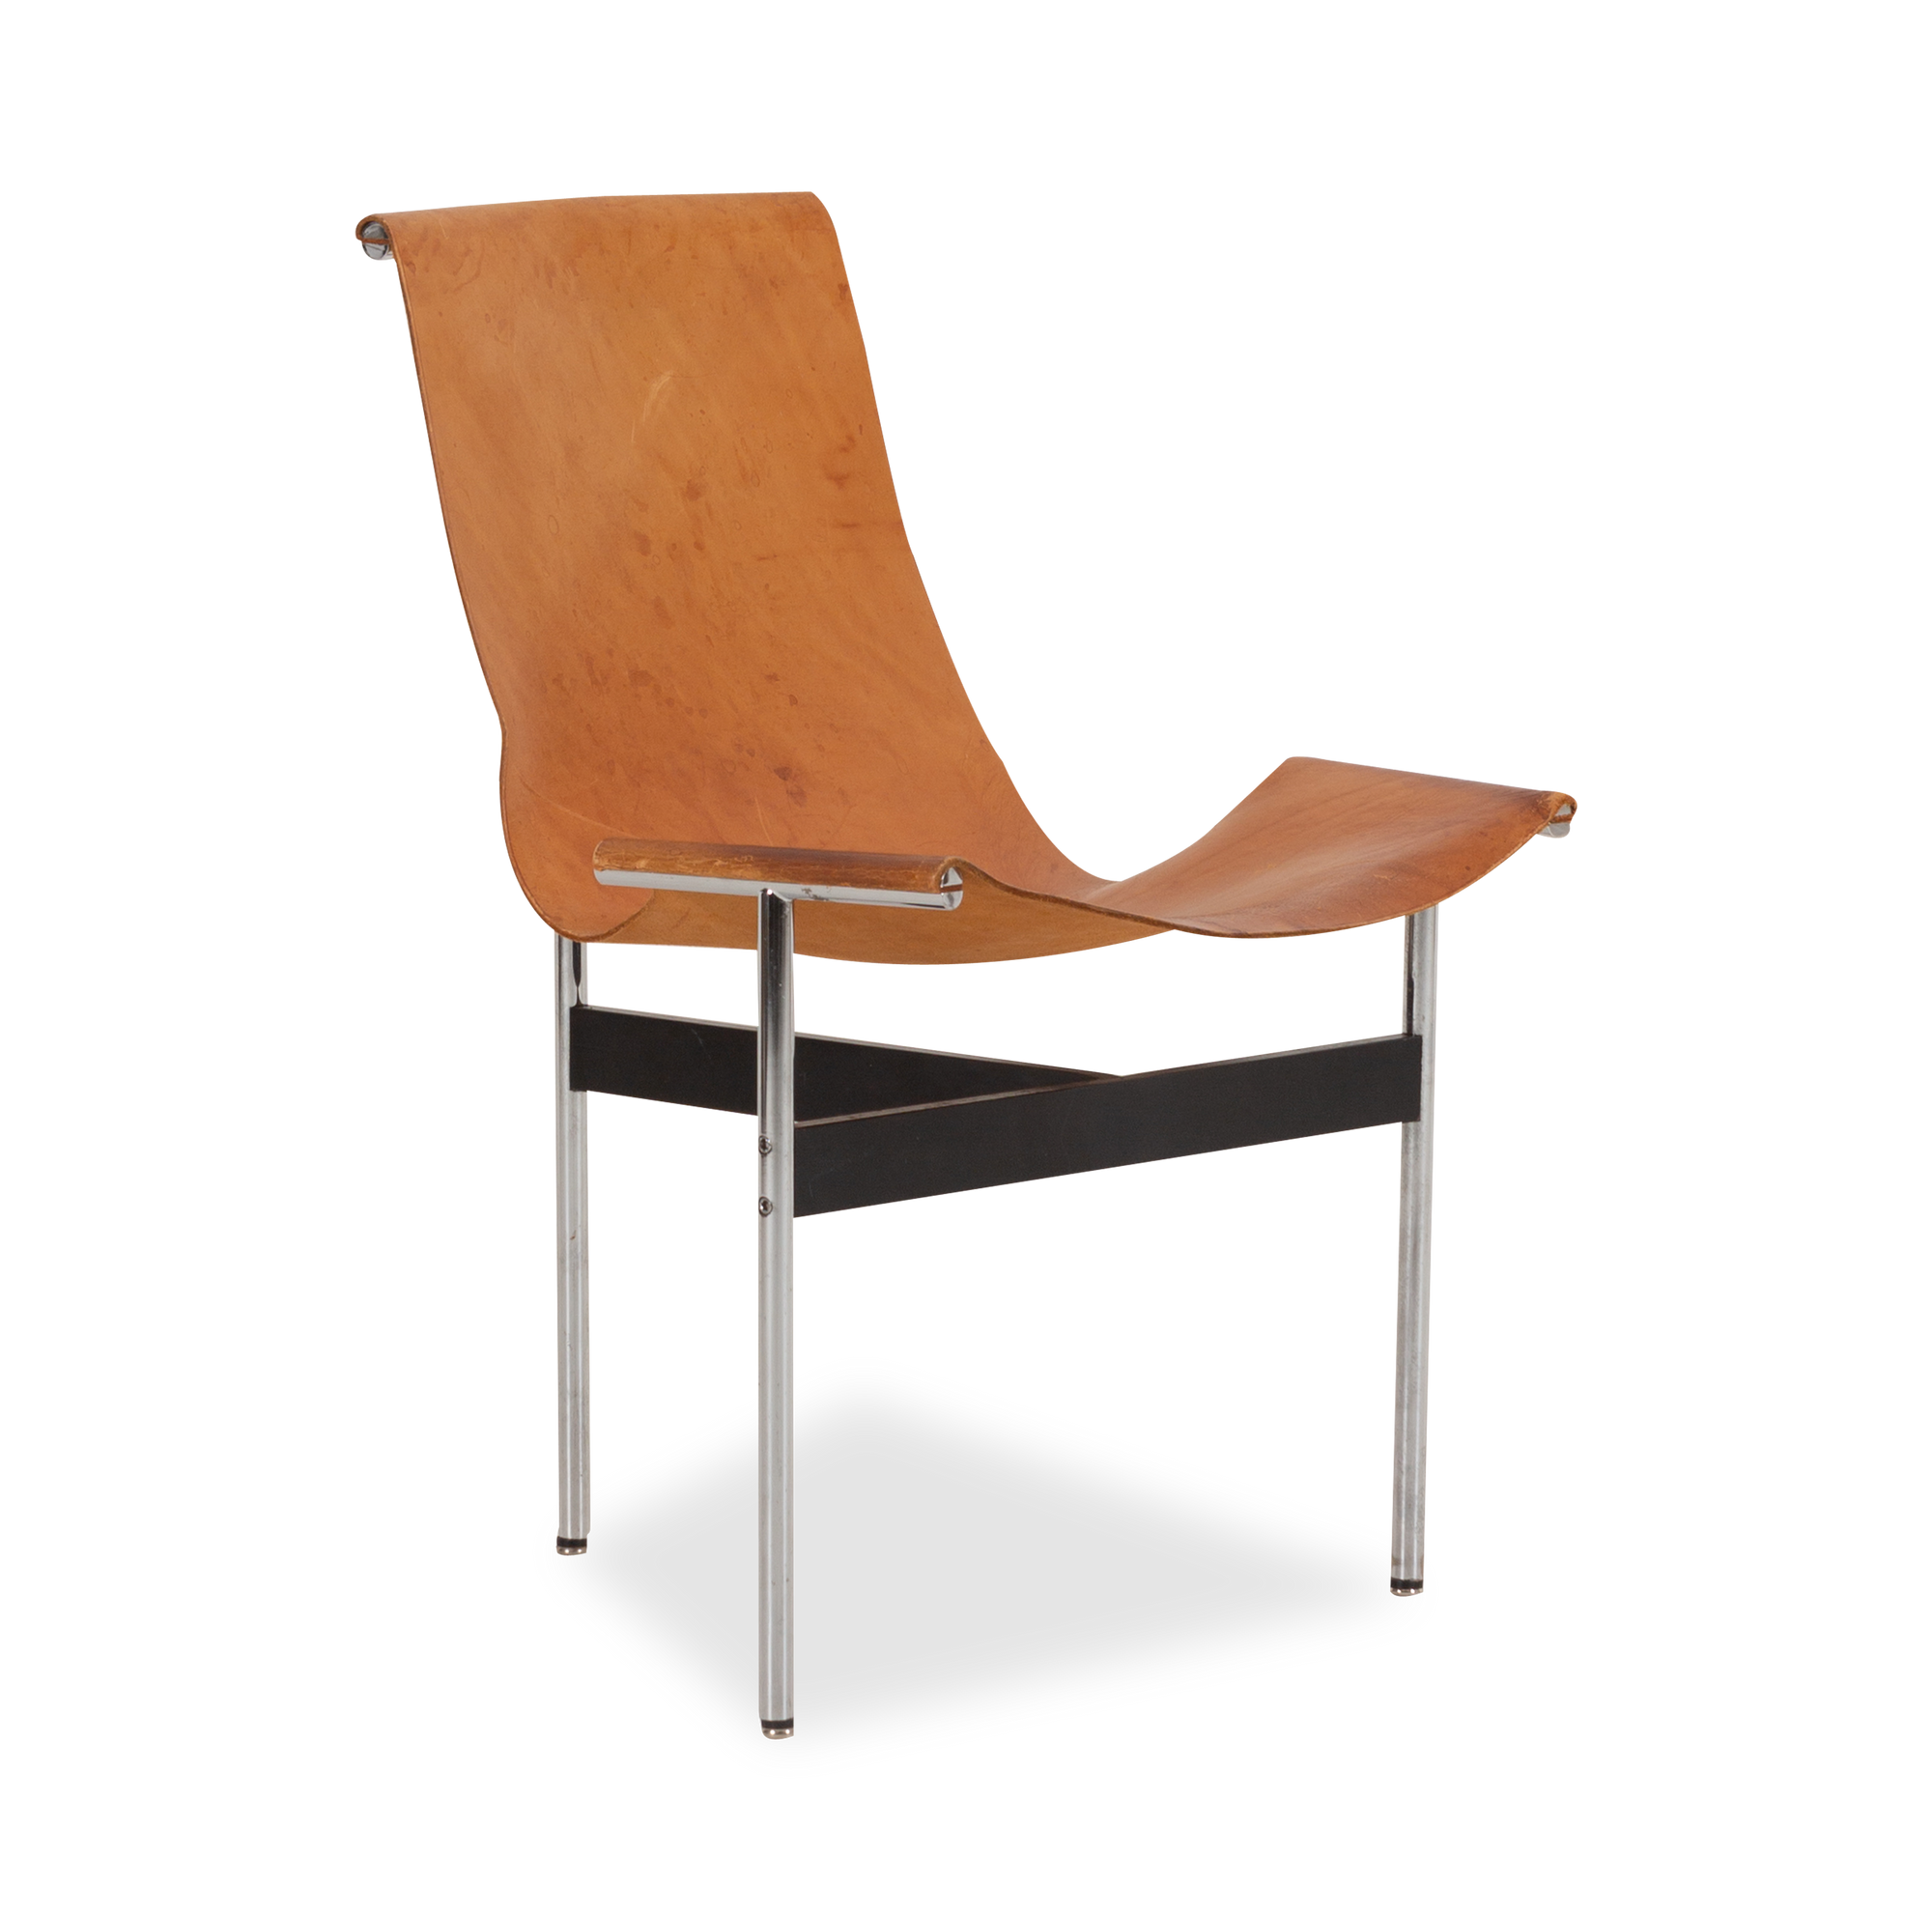 Designed in 1952, the T Chair is defined by its T-shaped silhouette.